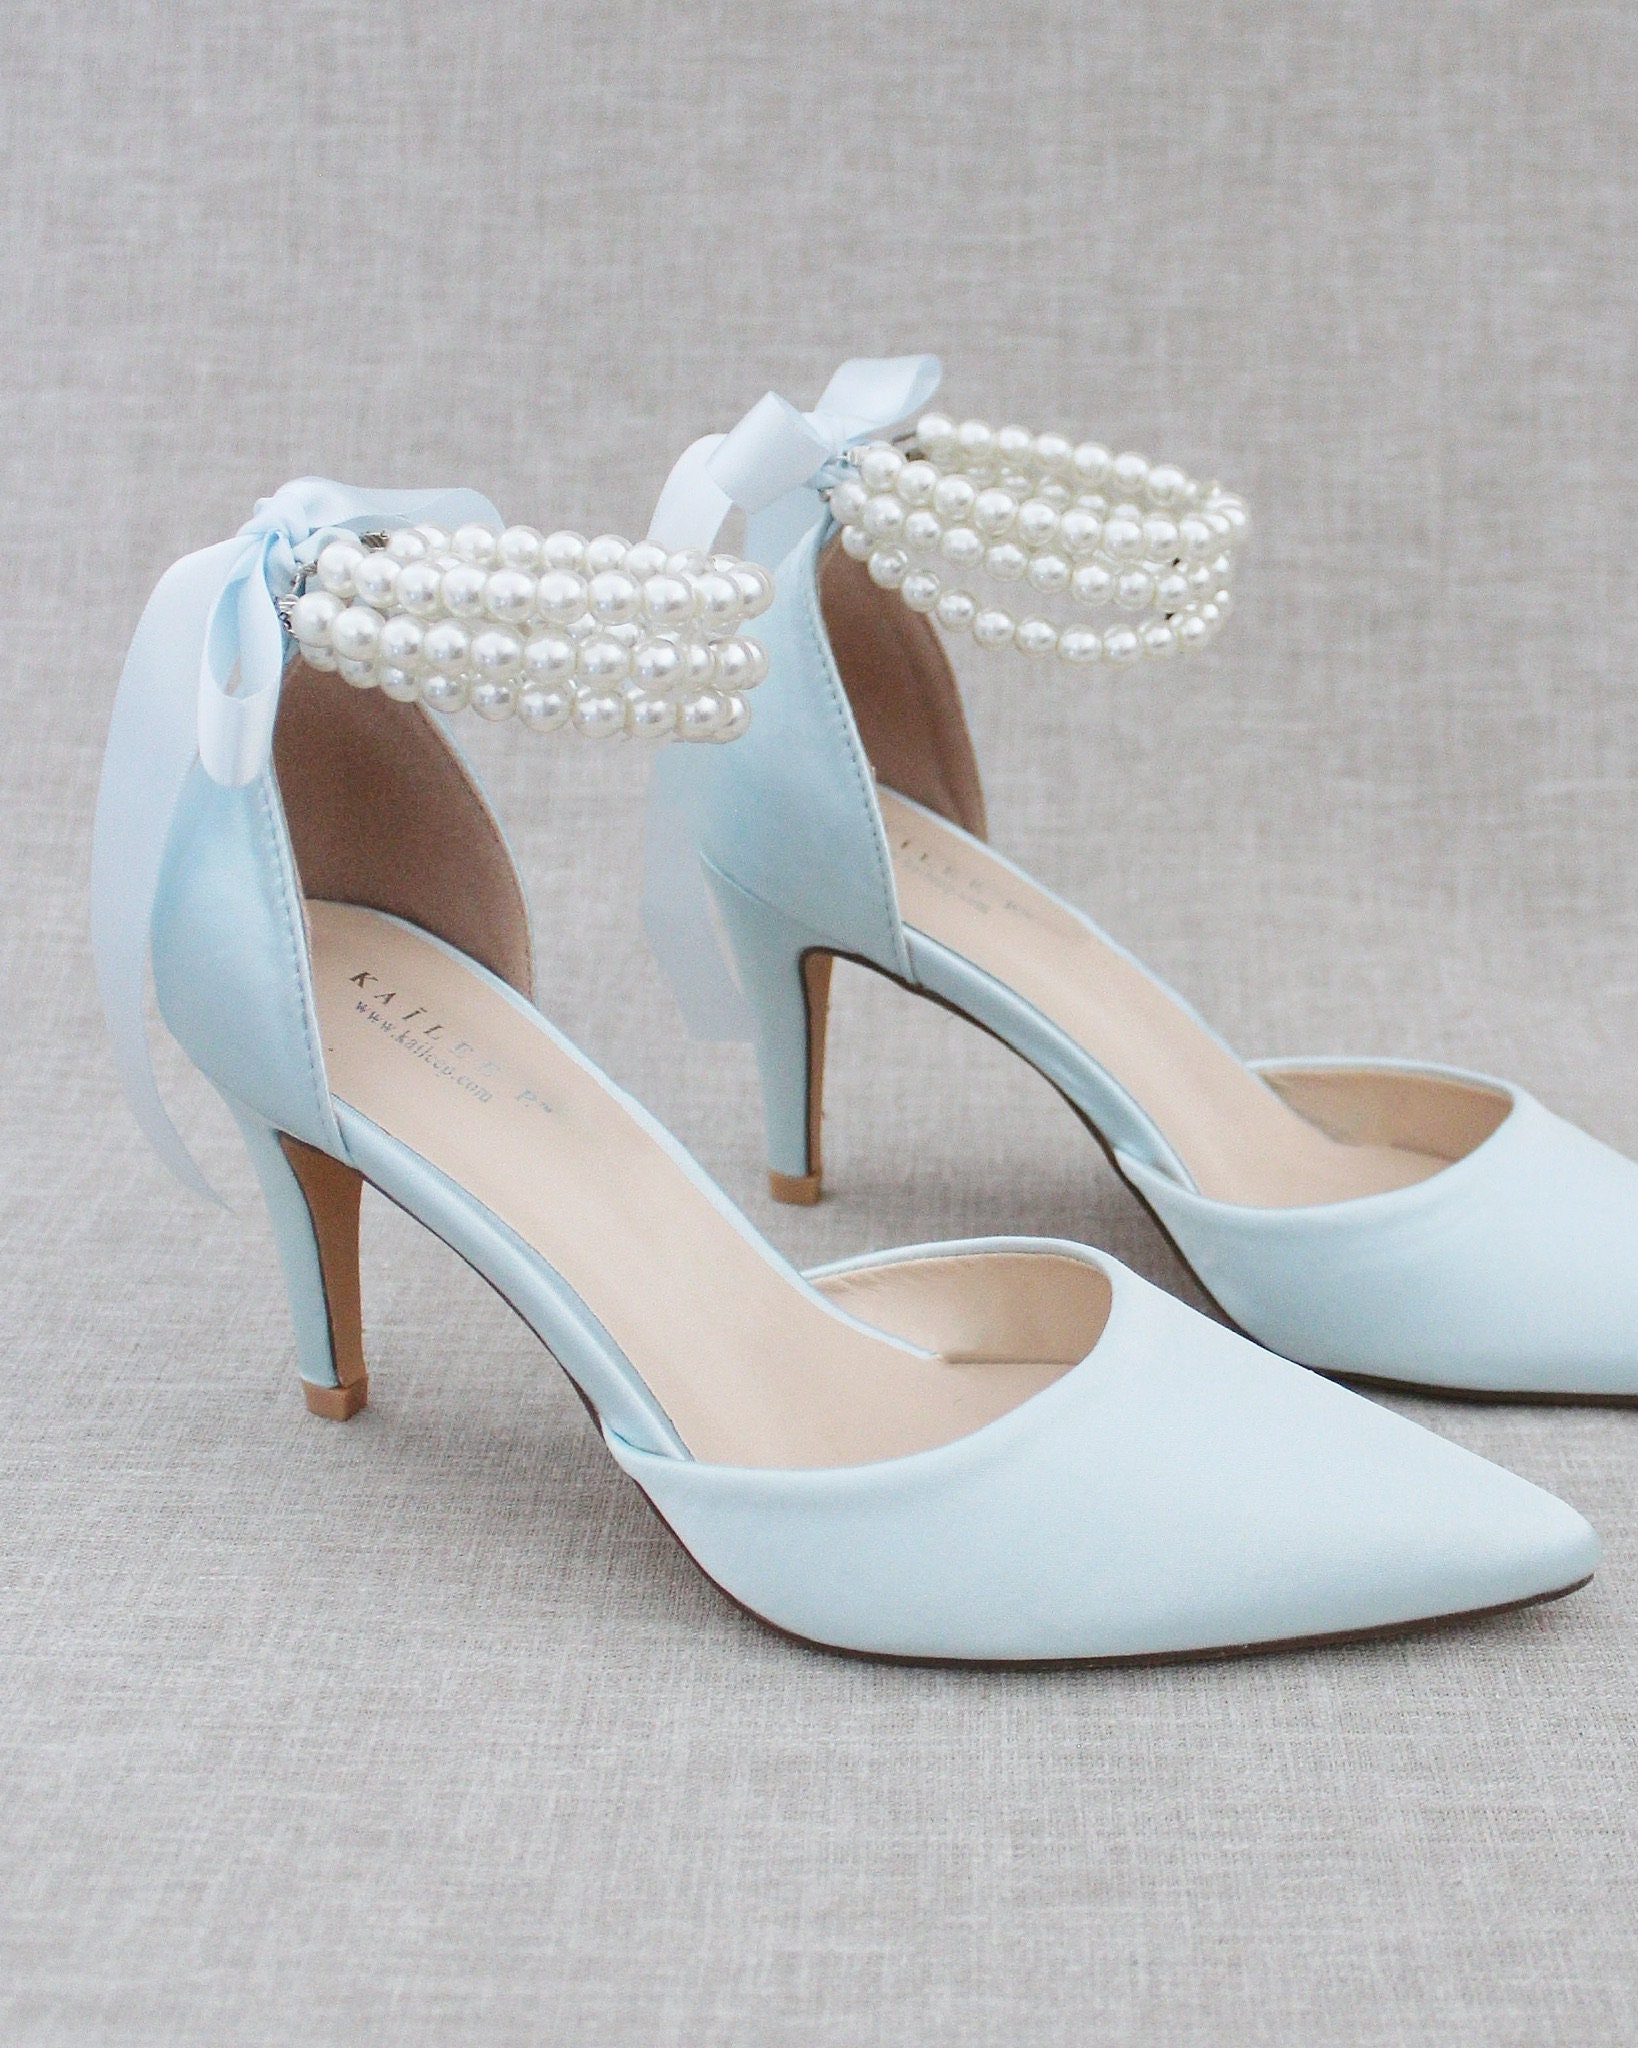 Light Blue Crochet Lace Block Heel Sandals With Small Pearl Applique, Women Wedding  Shoes, Bridesmaids Shoes, Bridal Shoes, Something Blue - Etsy